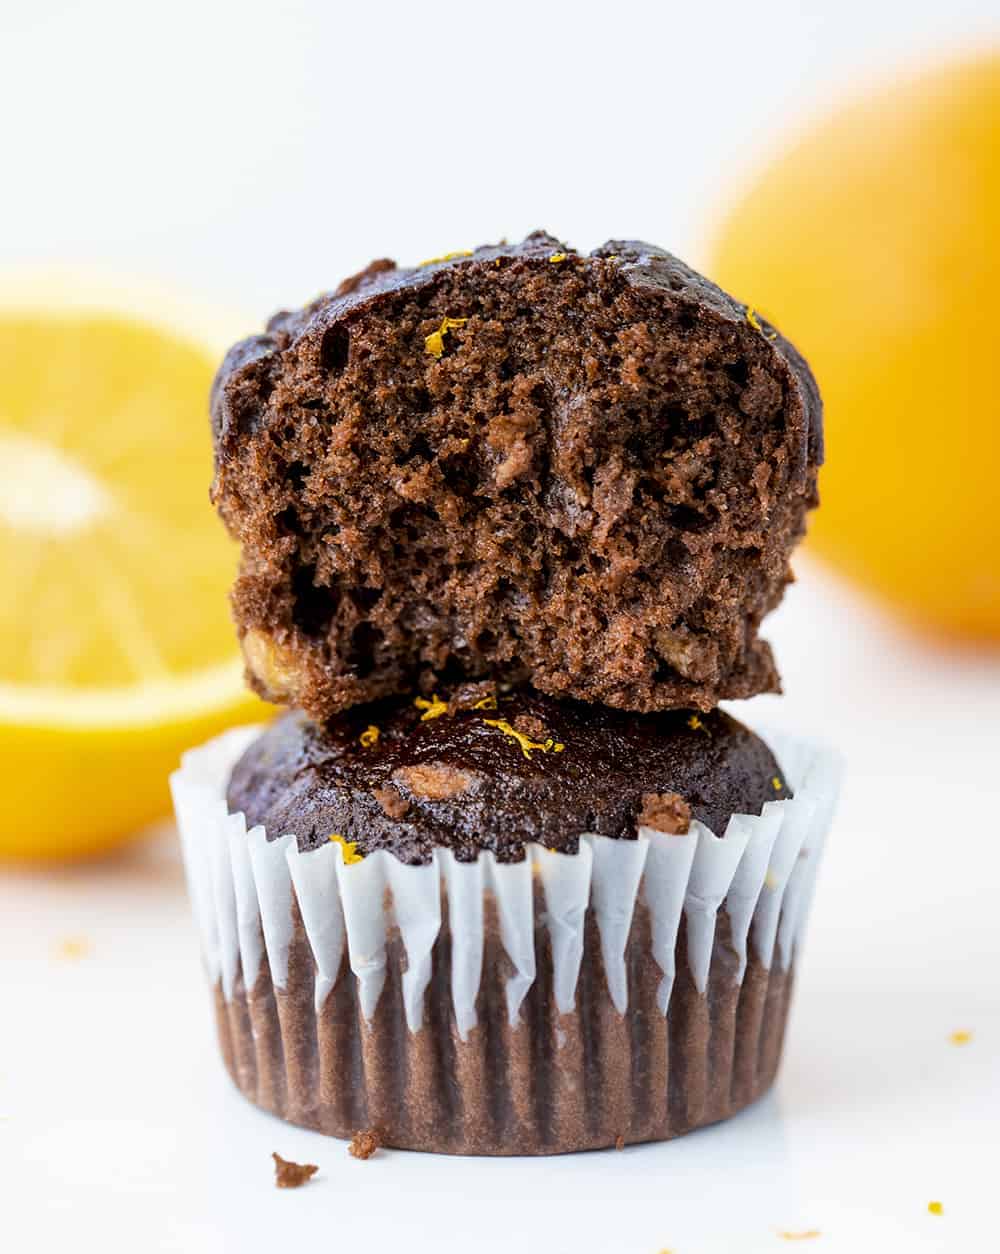 Stacked Chocolate Orange Muffins with One Cut in Half to Show the Inside